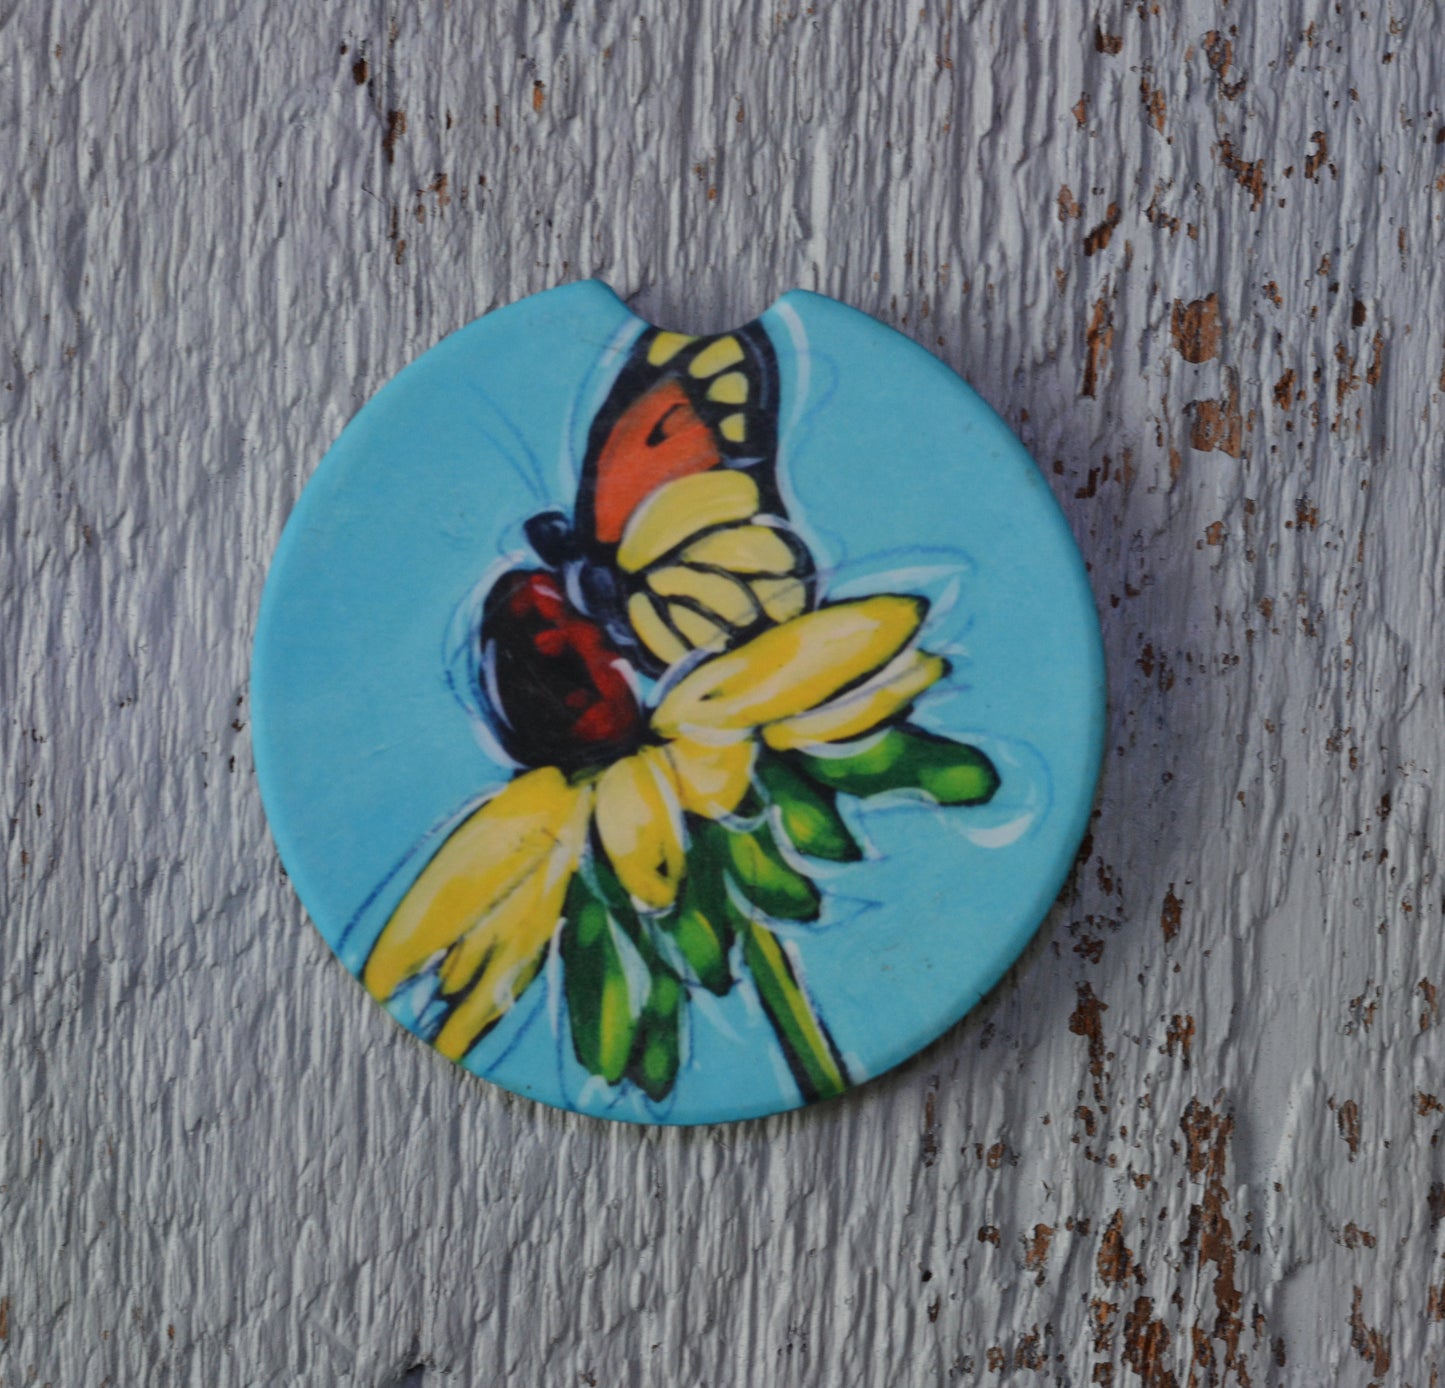 Car Coaster:. Black Eyed Susan and Butterfly. Artist Christi Dreese